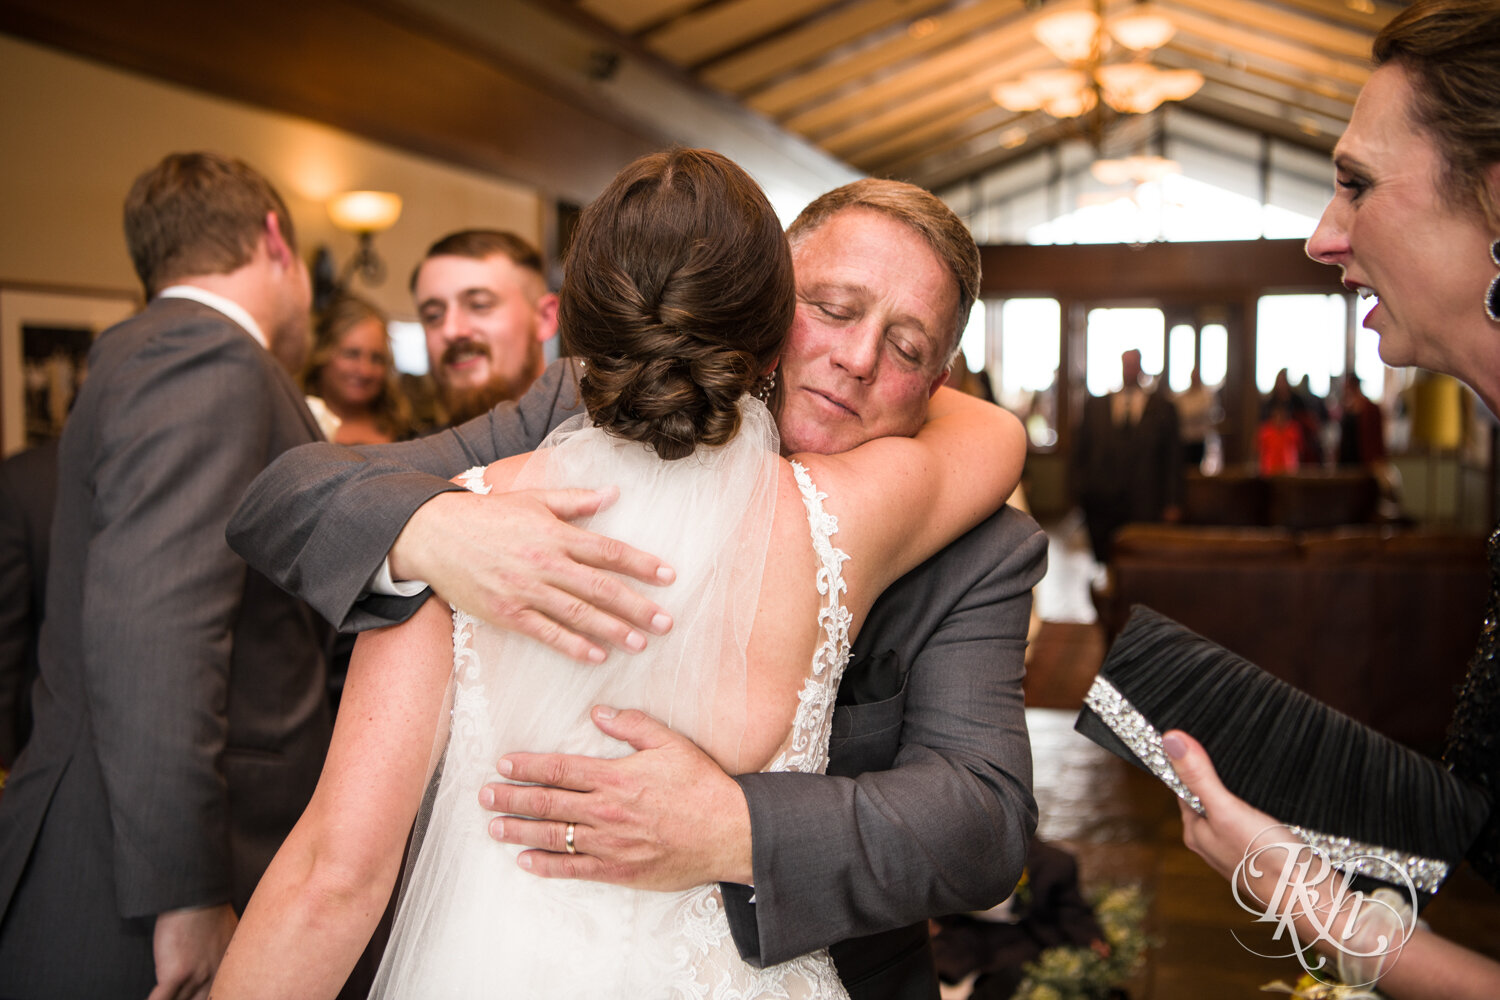 Dad hugs bride after wedding ceremony on rainy day at The Wilds Golf Club in Prior Lake, Minnesota.